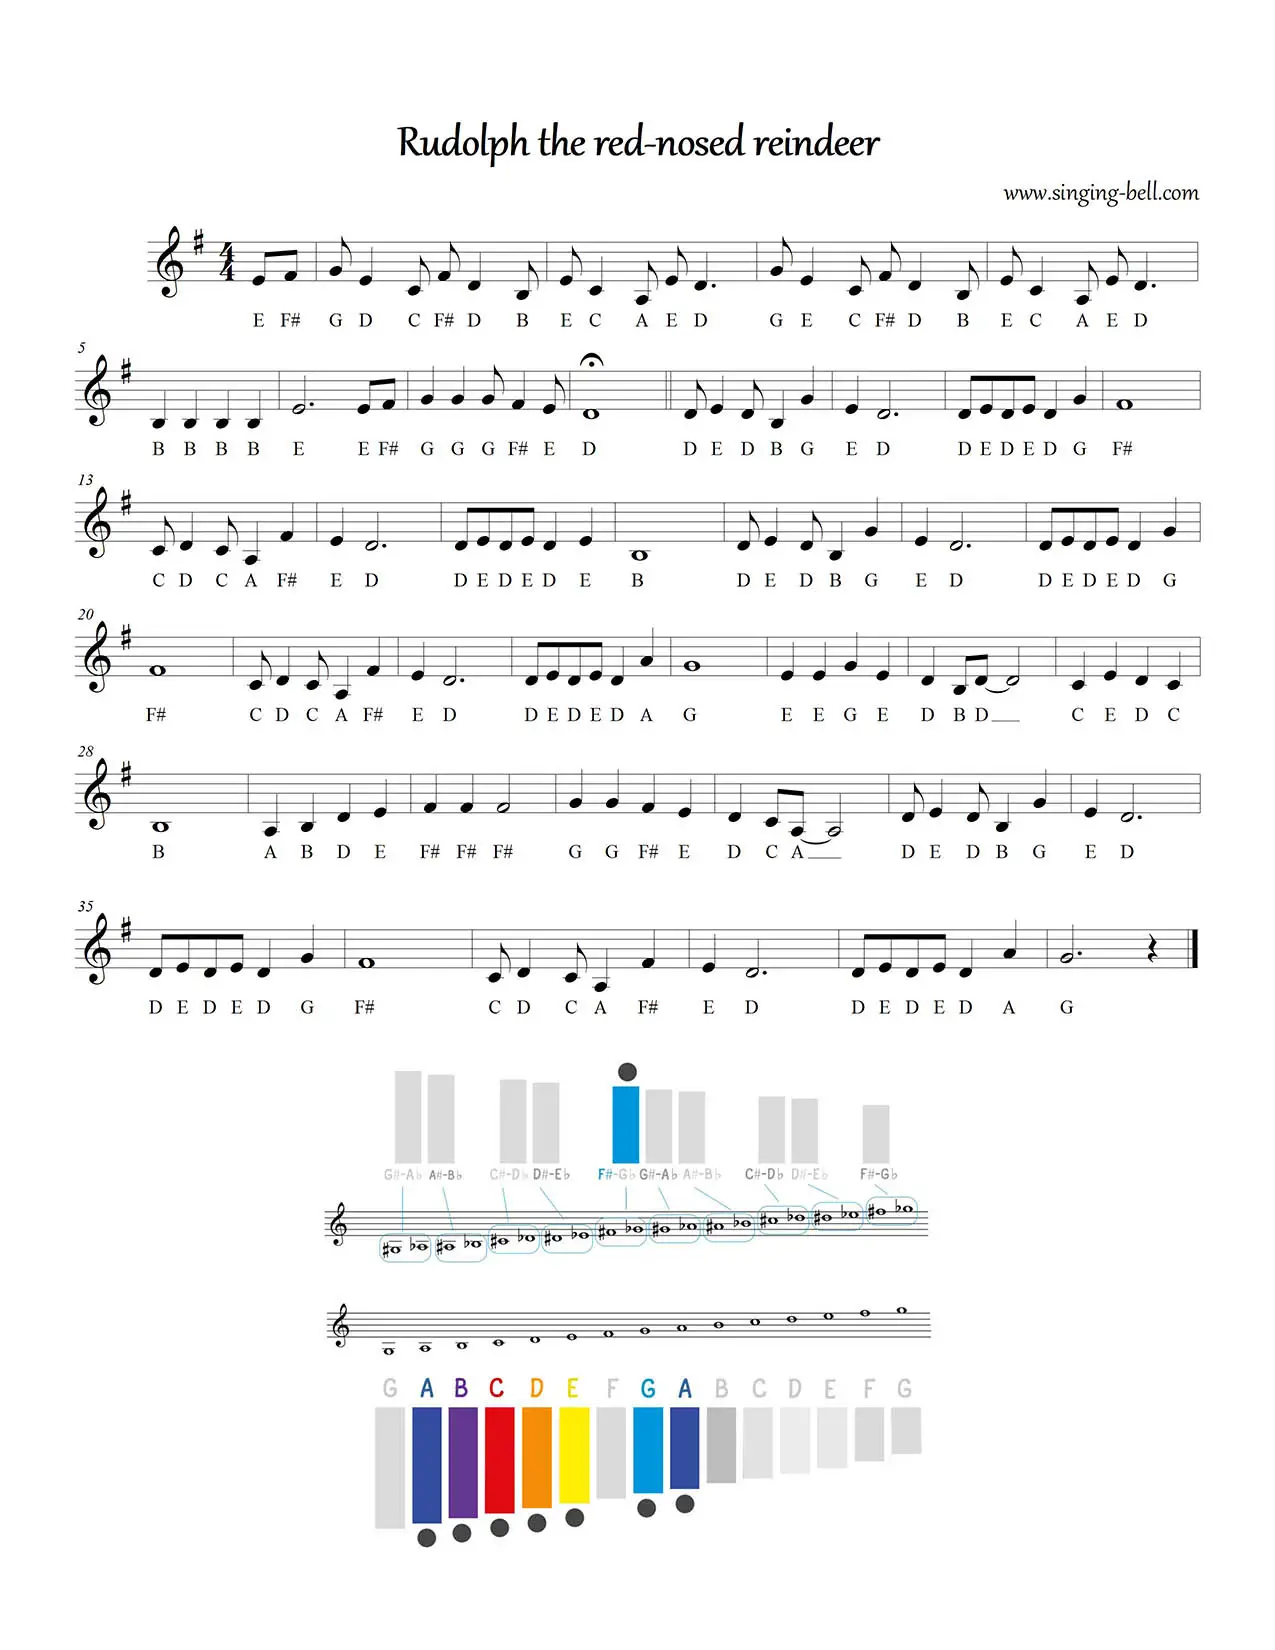 Rudolph the Red-Nosed Reindeer free glockenspiel sheet music notes pdf